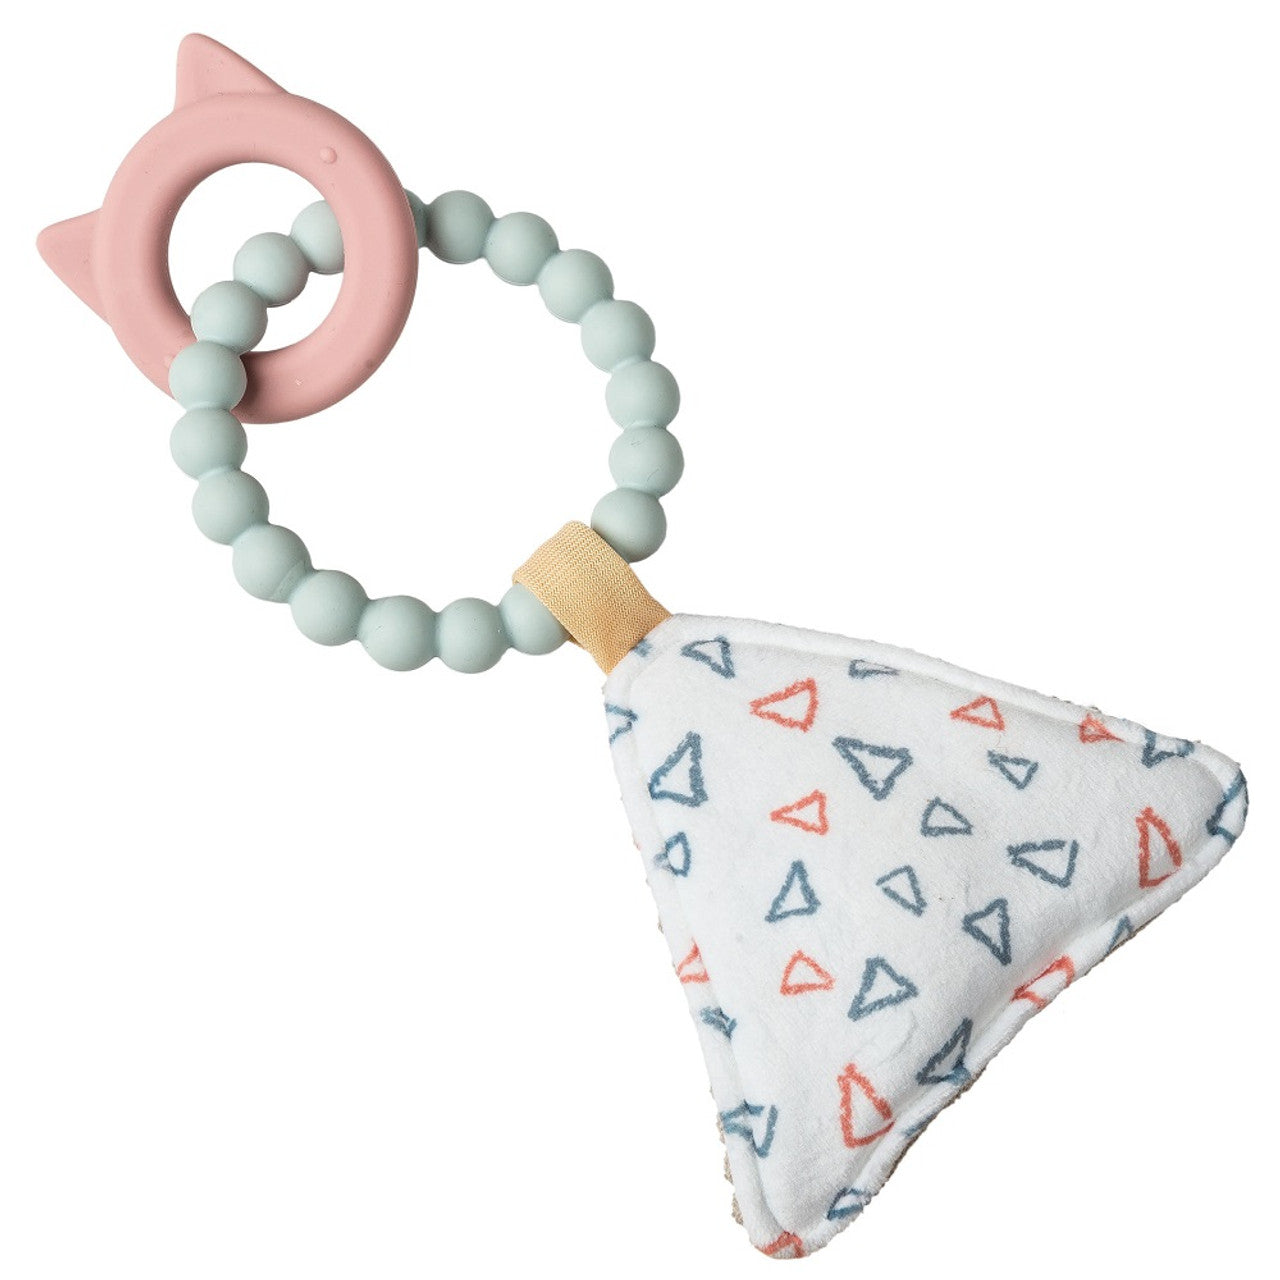 Blue silicone teething ring with a pink silicone cat teether and white fabric triangle squeaker.